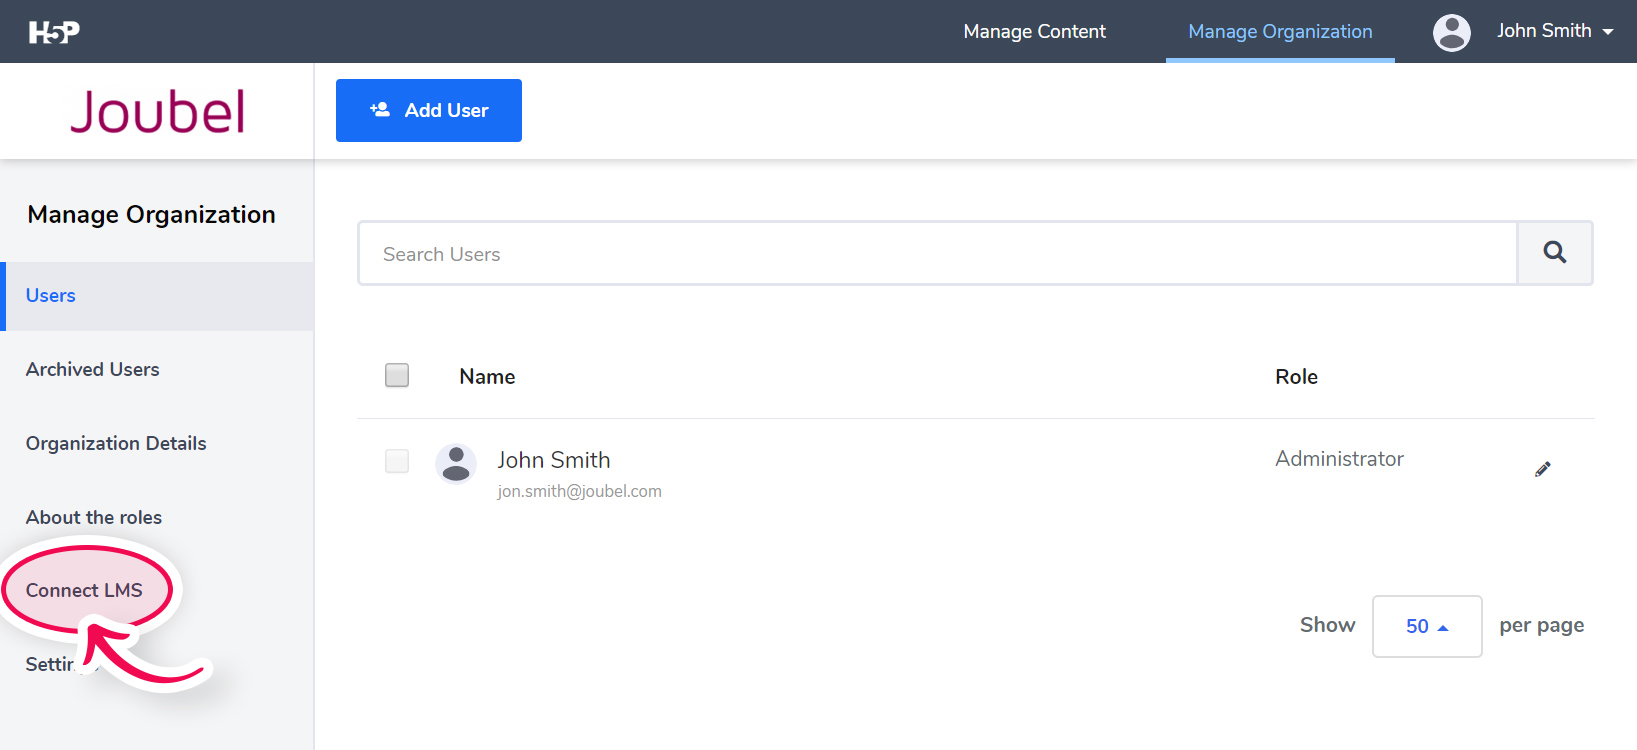 Connect LMS section inside Manage Organization